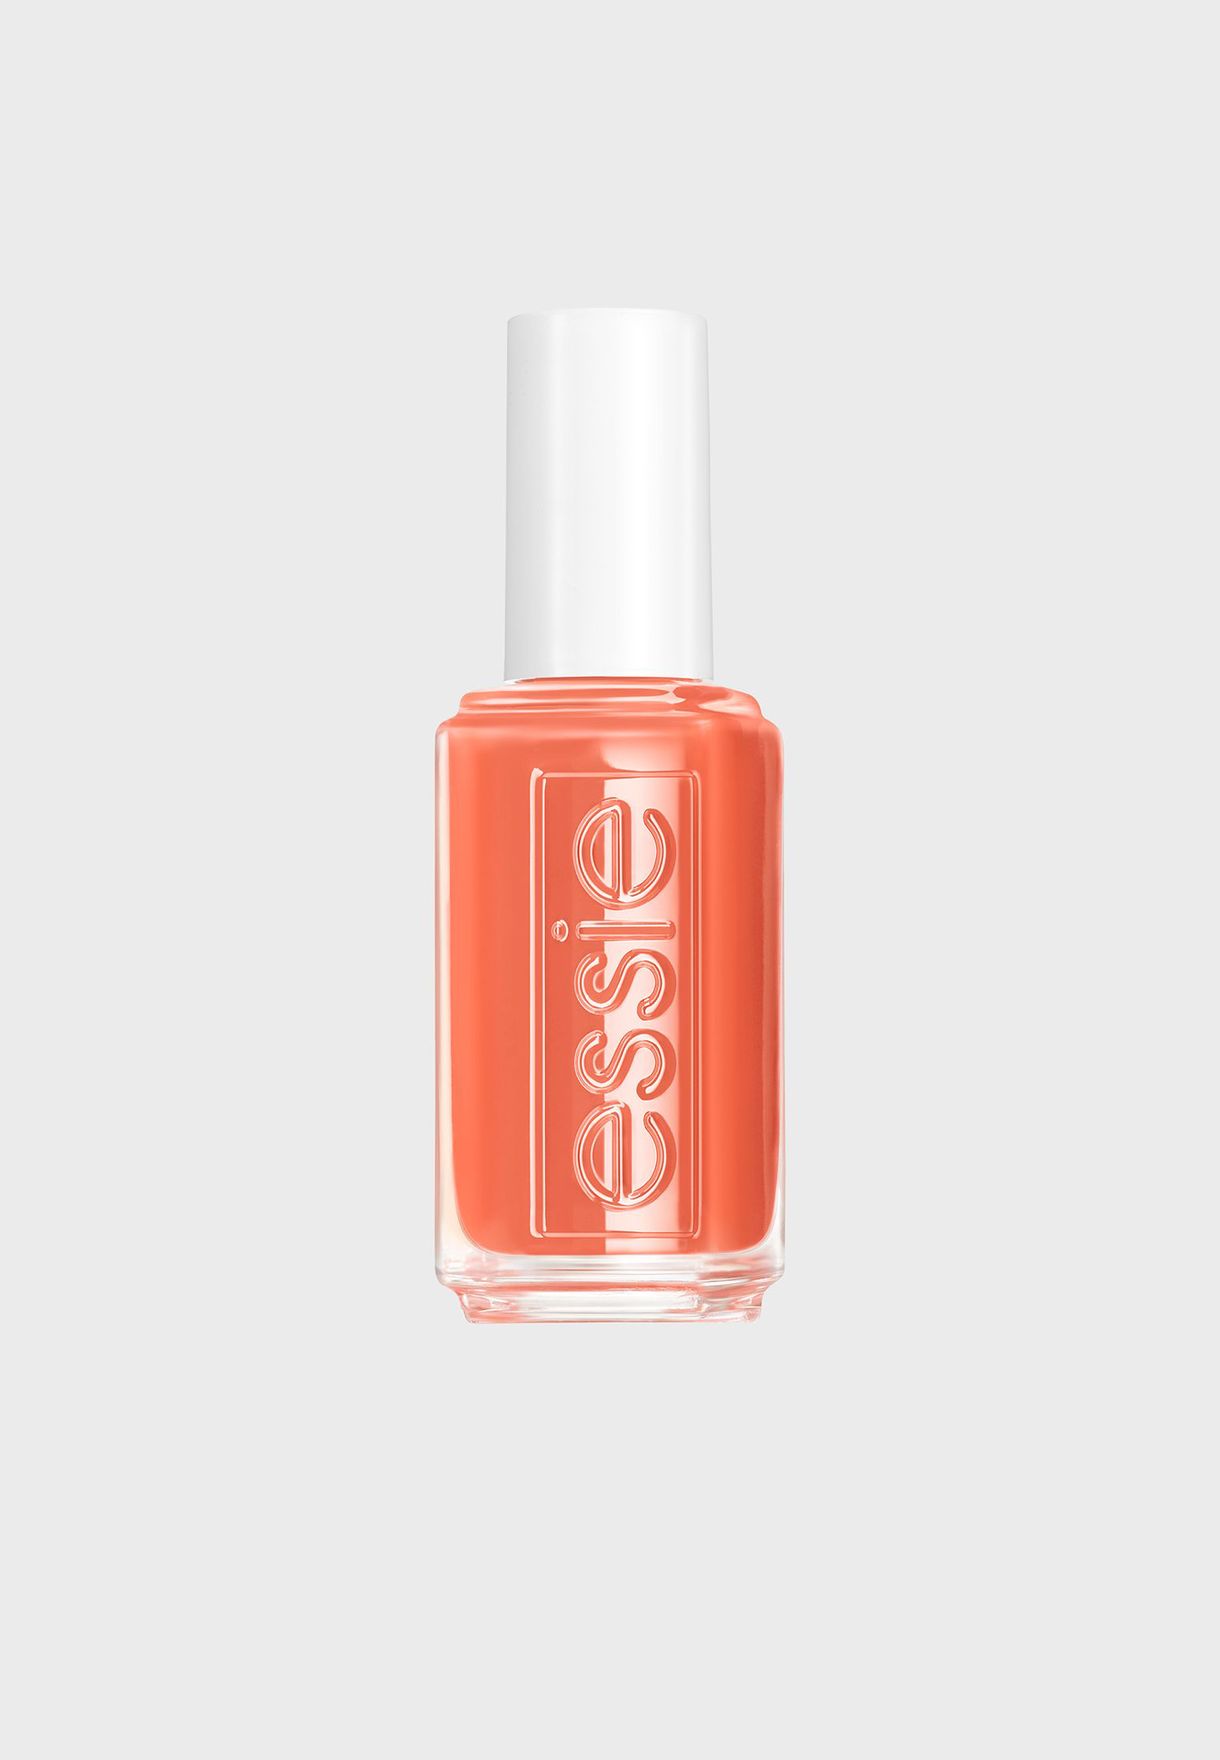 Quick Dry Nail Polish - In A Flash Sale